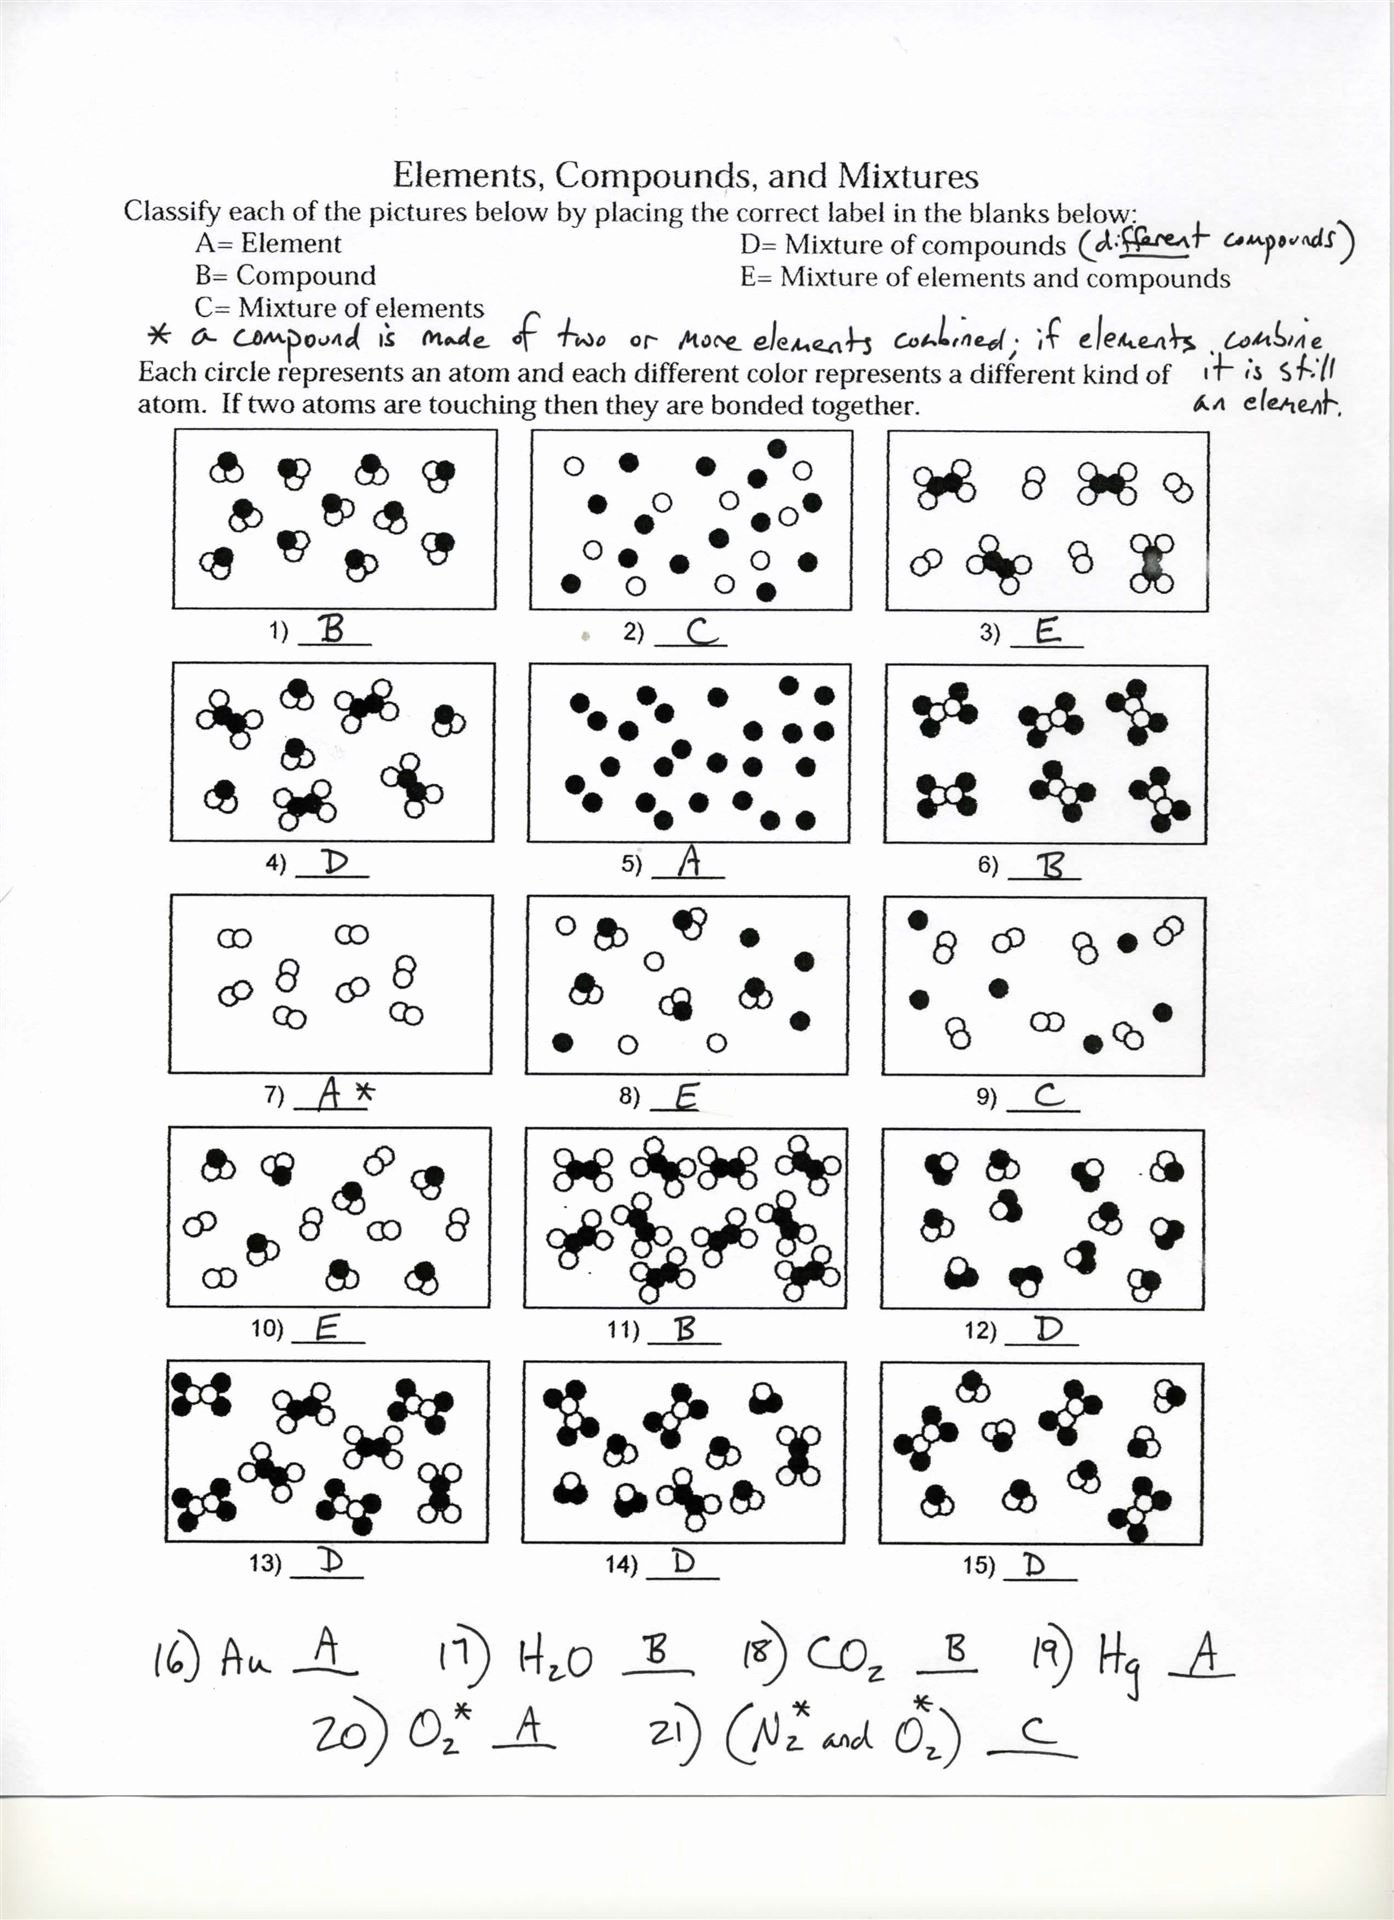 Elements Compounds Mixtures Worksheet Answers Lovely Elements Pounds and Mixtures 1 Worksheet Answers